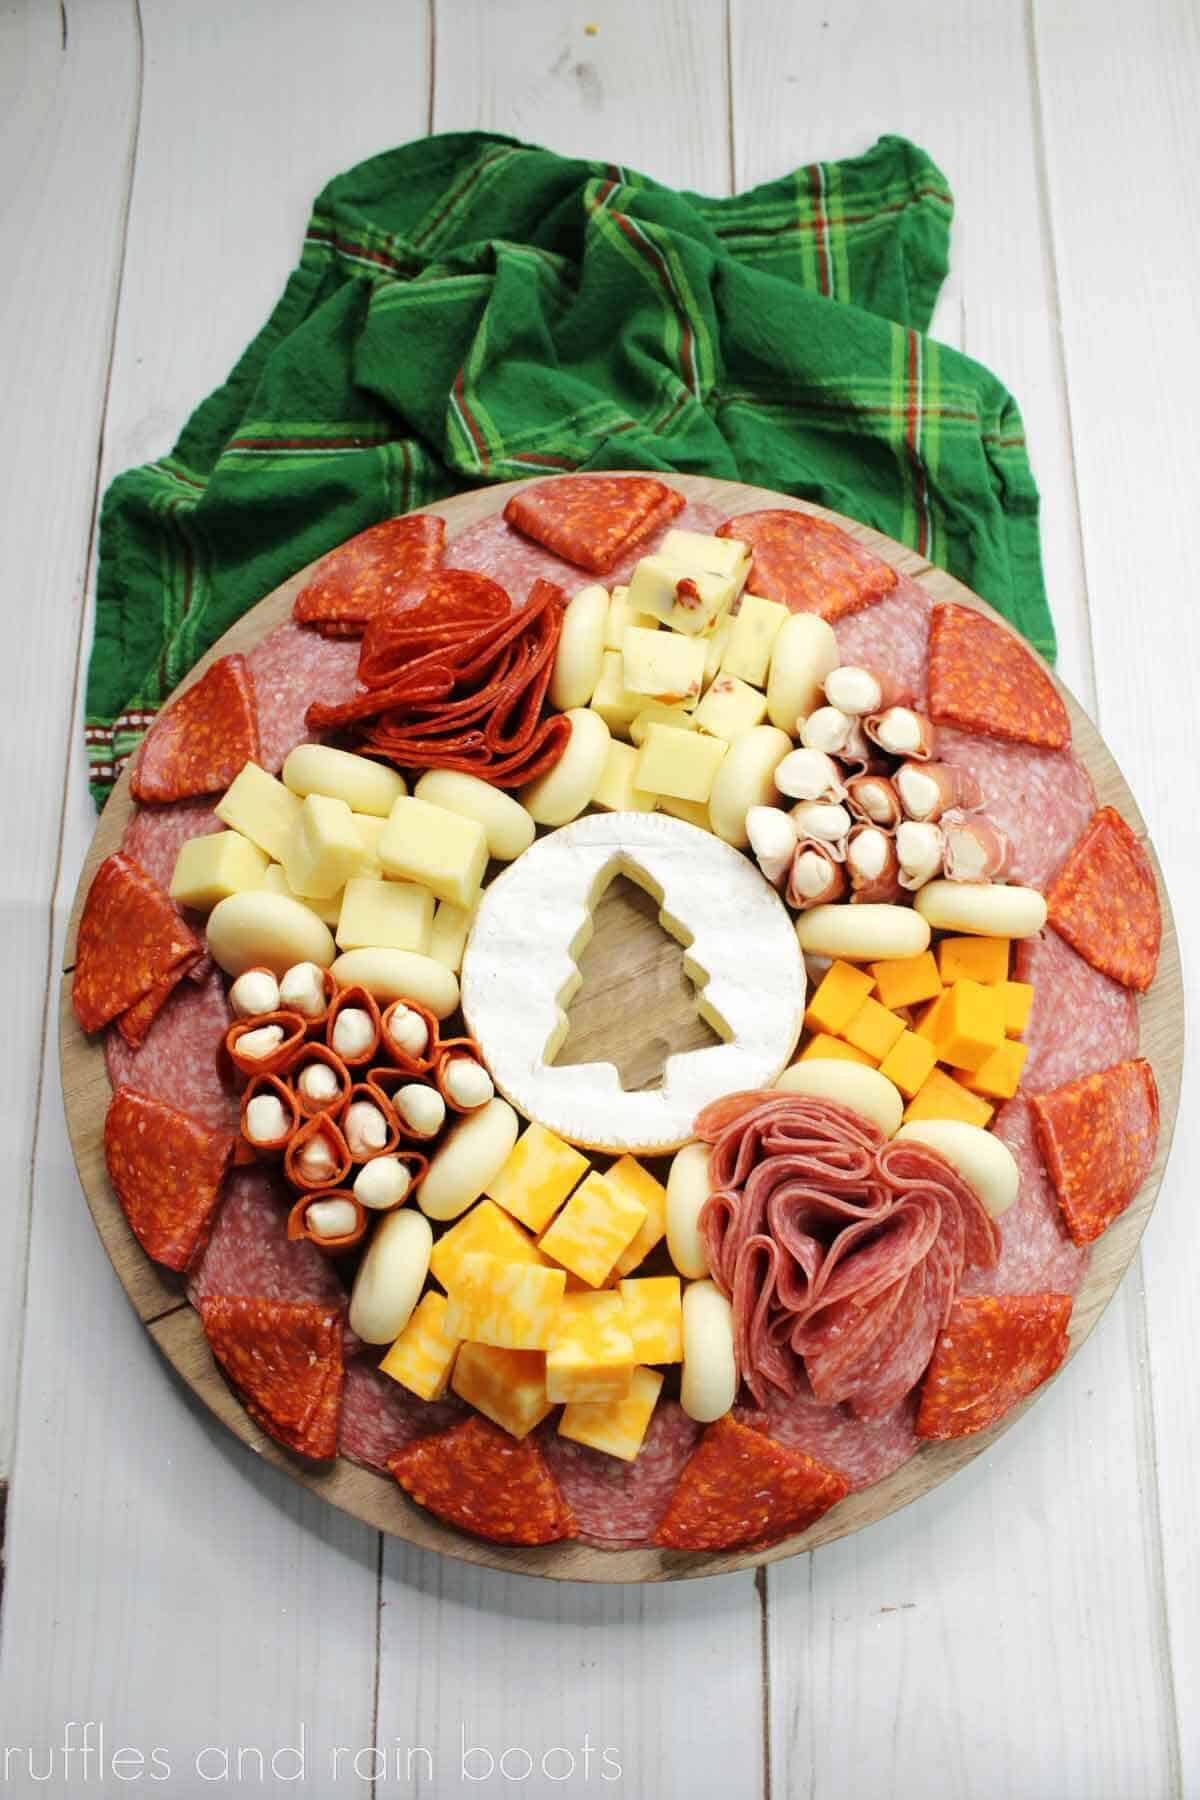 V Overhead view of a holiday charcuterie board with a variety of meats and cheese with a green plaid napkin on a white wood surface..